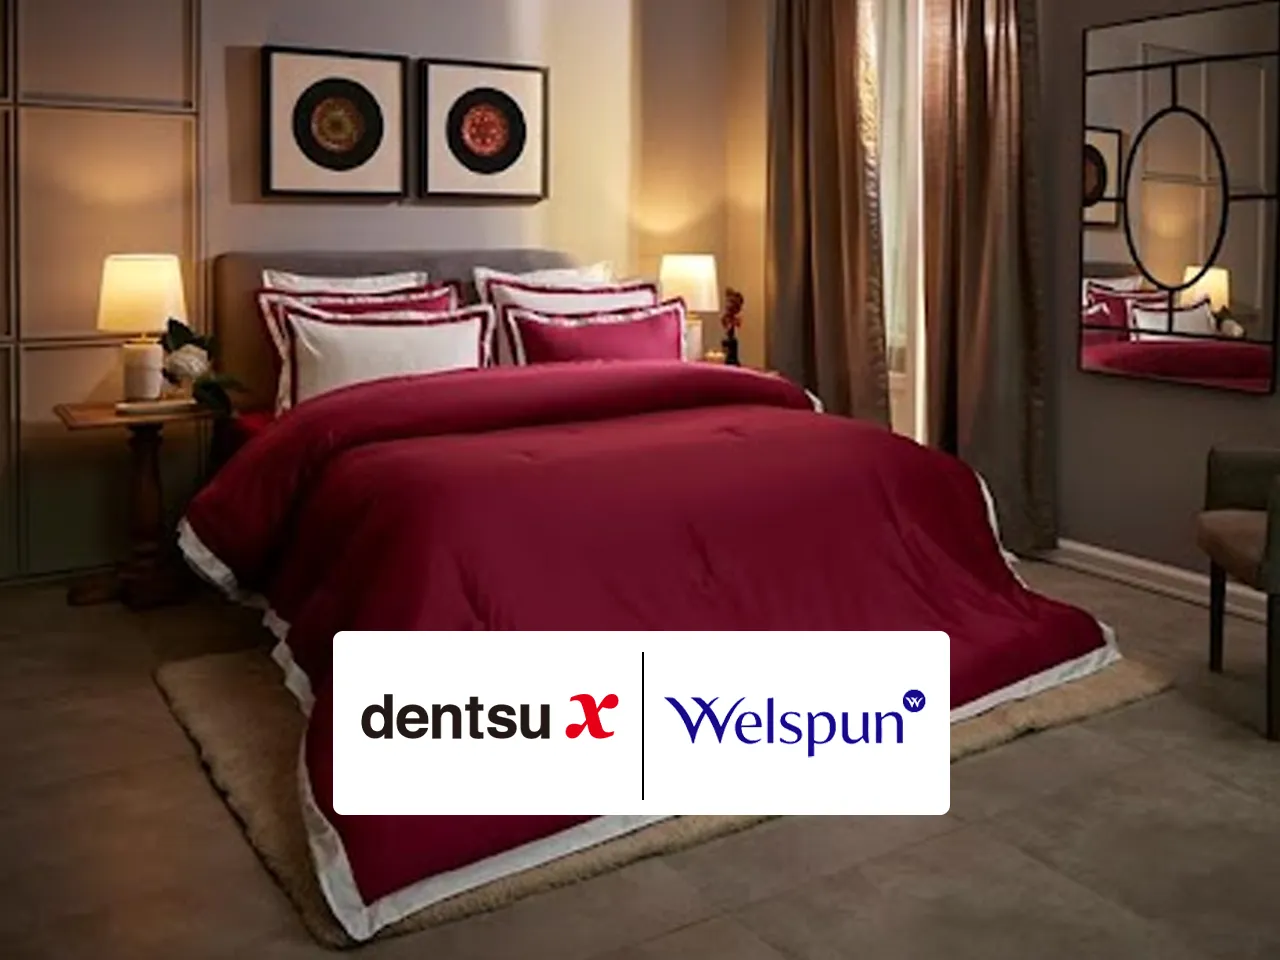 Welspun appoints dentsu X as its partner for Integrated Media Solutions